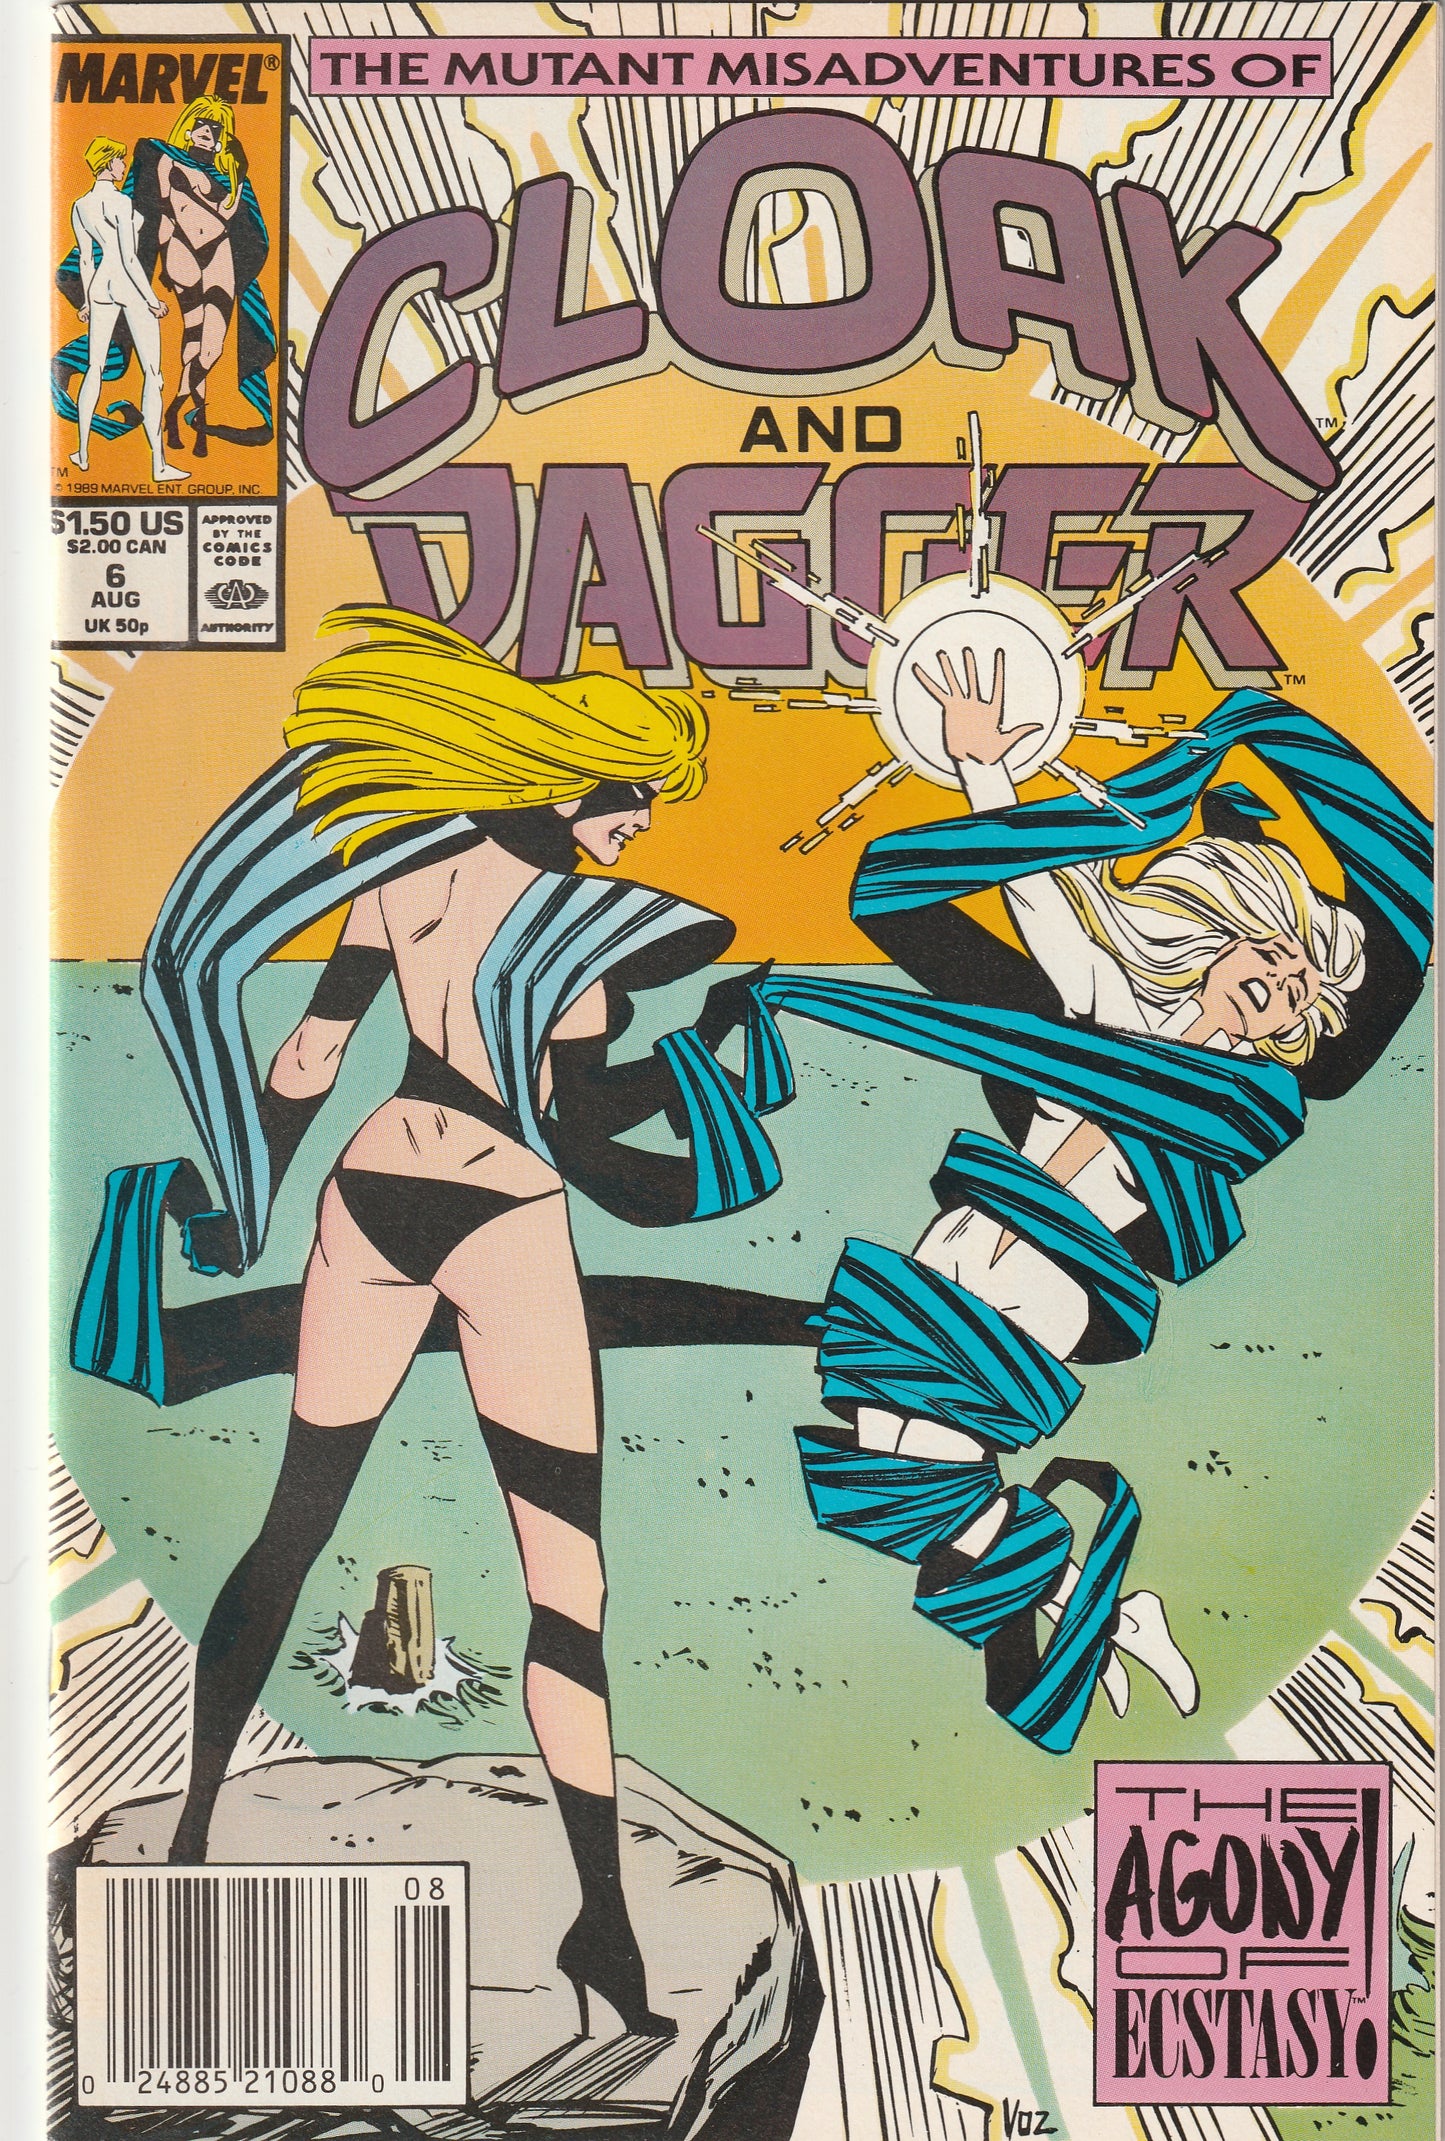 The Mutant Misadventures of Cloak and Dagger #6 (1989)